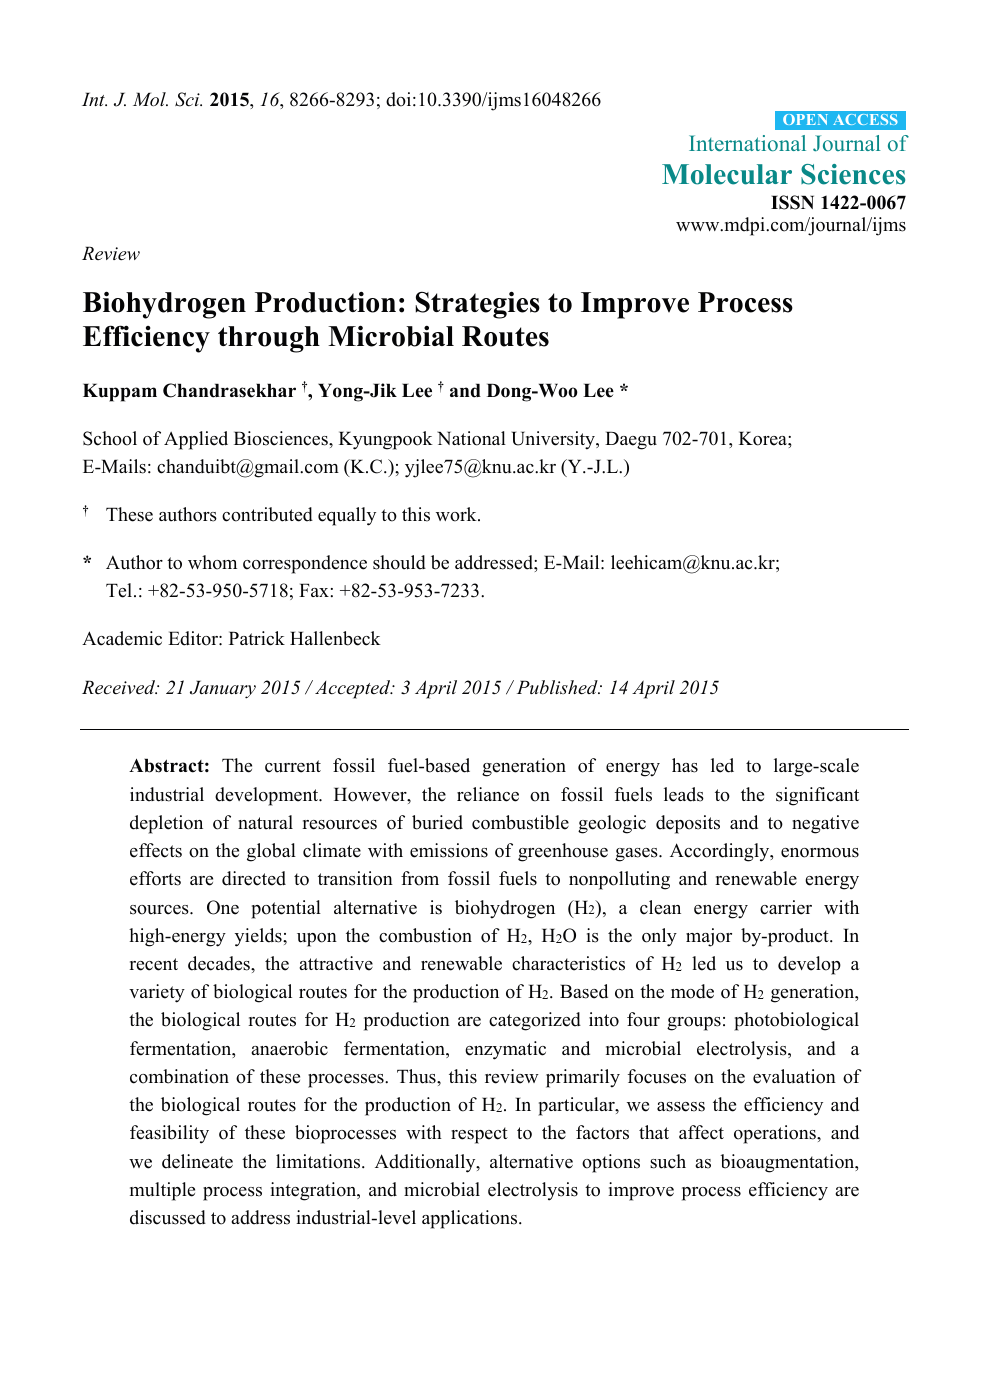 Biohydrogen Production Strategies To Improve Process Efficiency Through Microbial Routes Topic Of Research Paper In Chemical Sciences Download Scholarly Article Pdf And Read For Free On Cyberleninka Open Science Hub